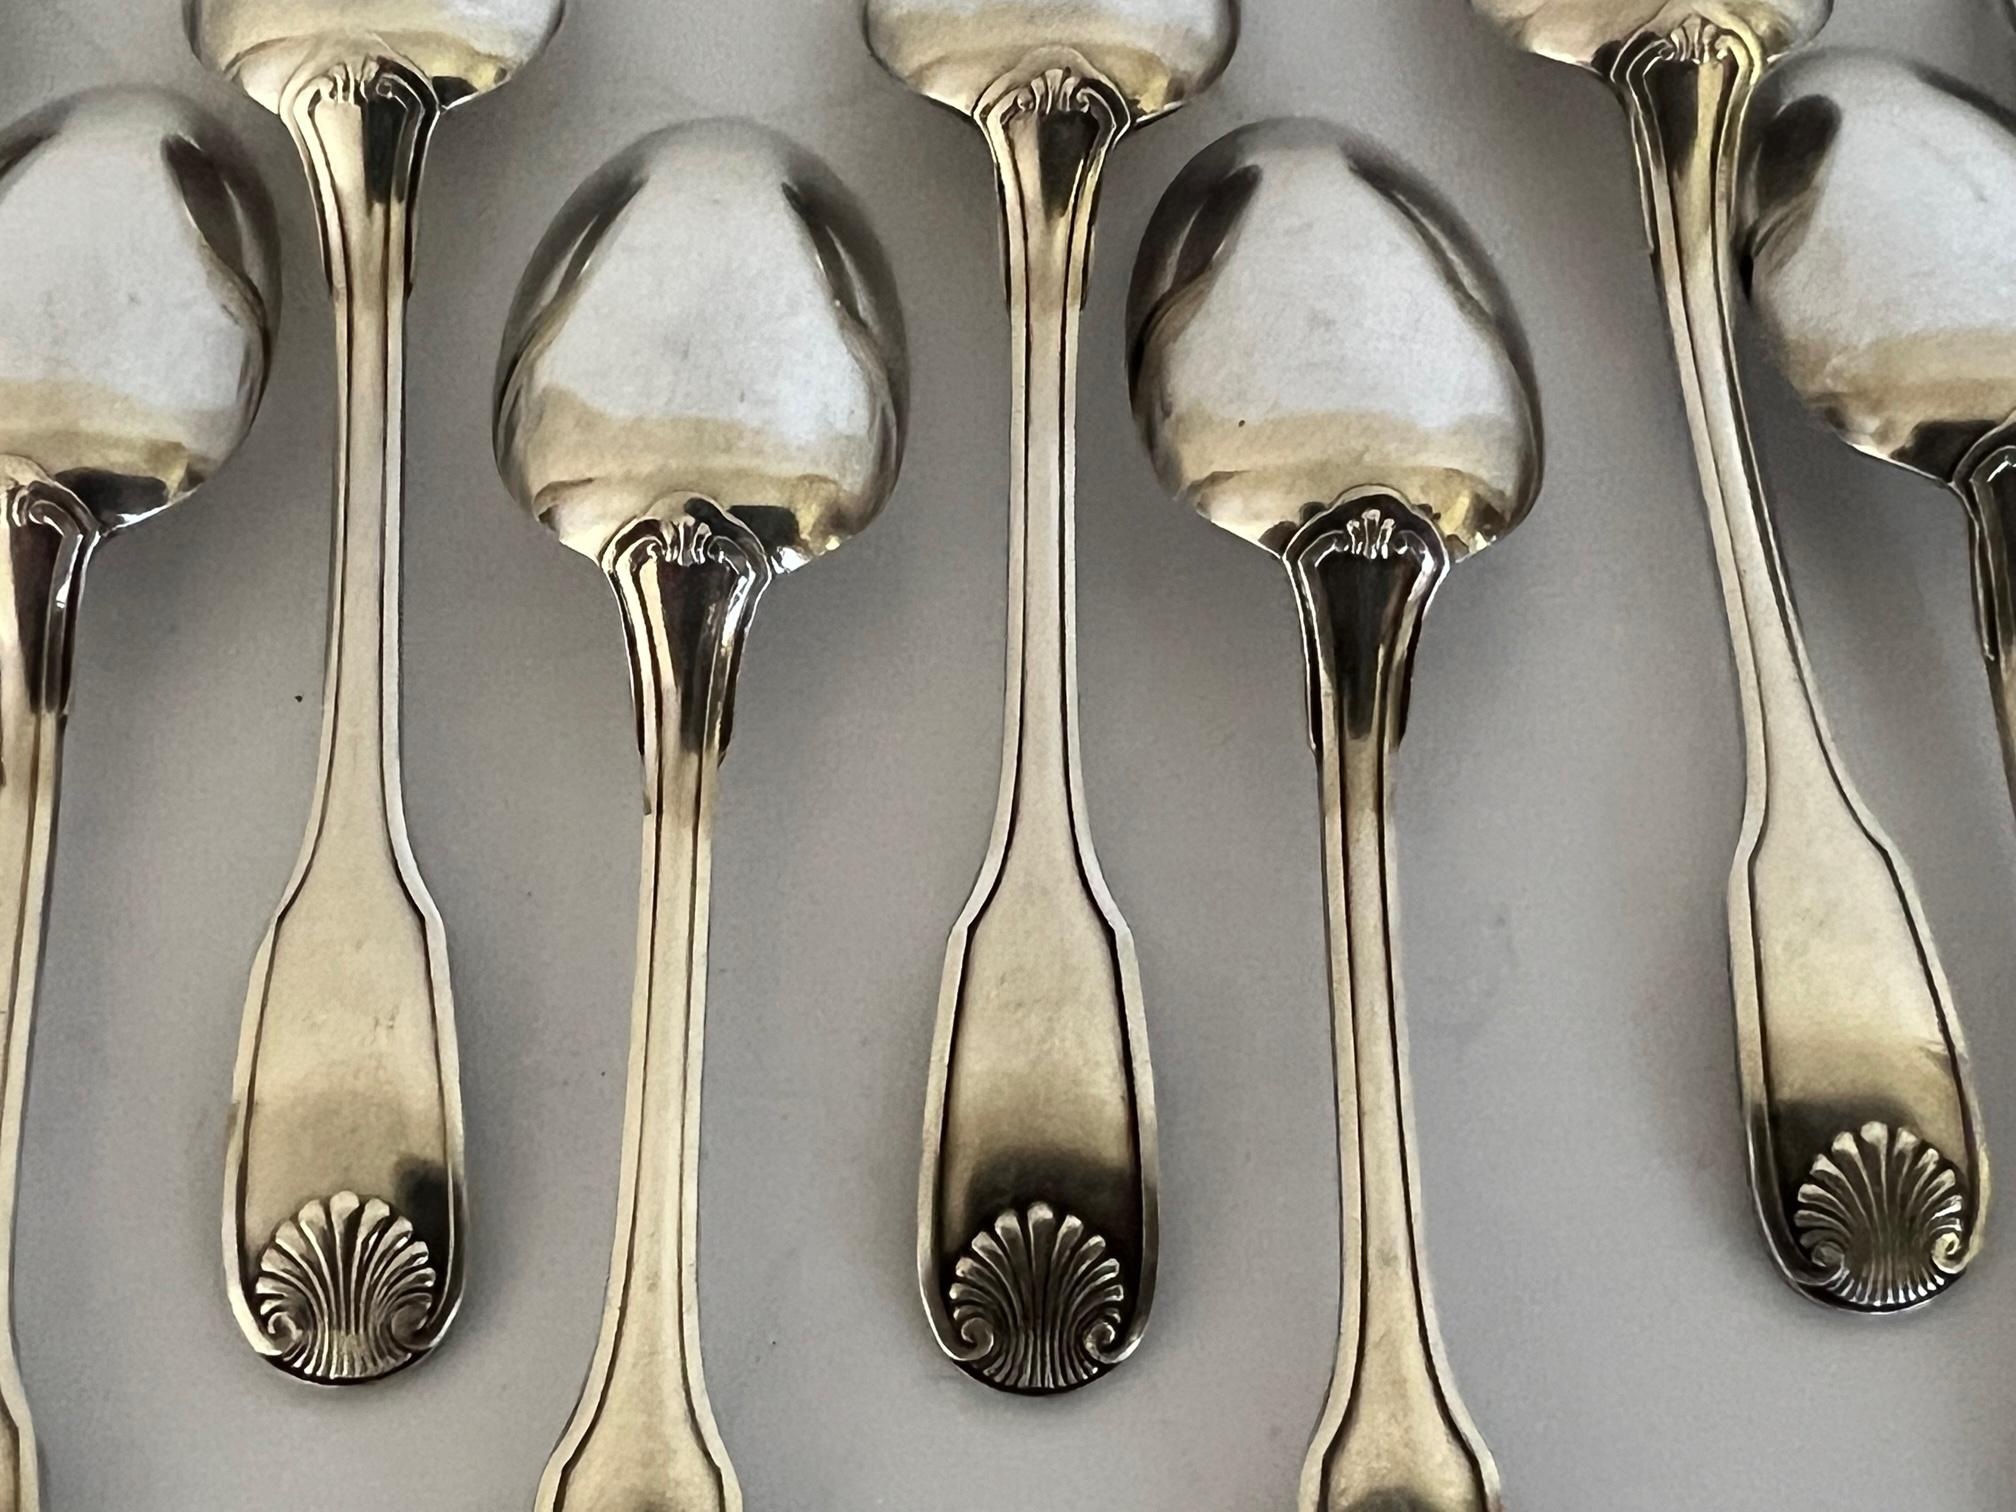 Christofle Demitasse Spoons in Vendome Pattern in Box- Set of 12 For Sale 3